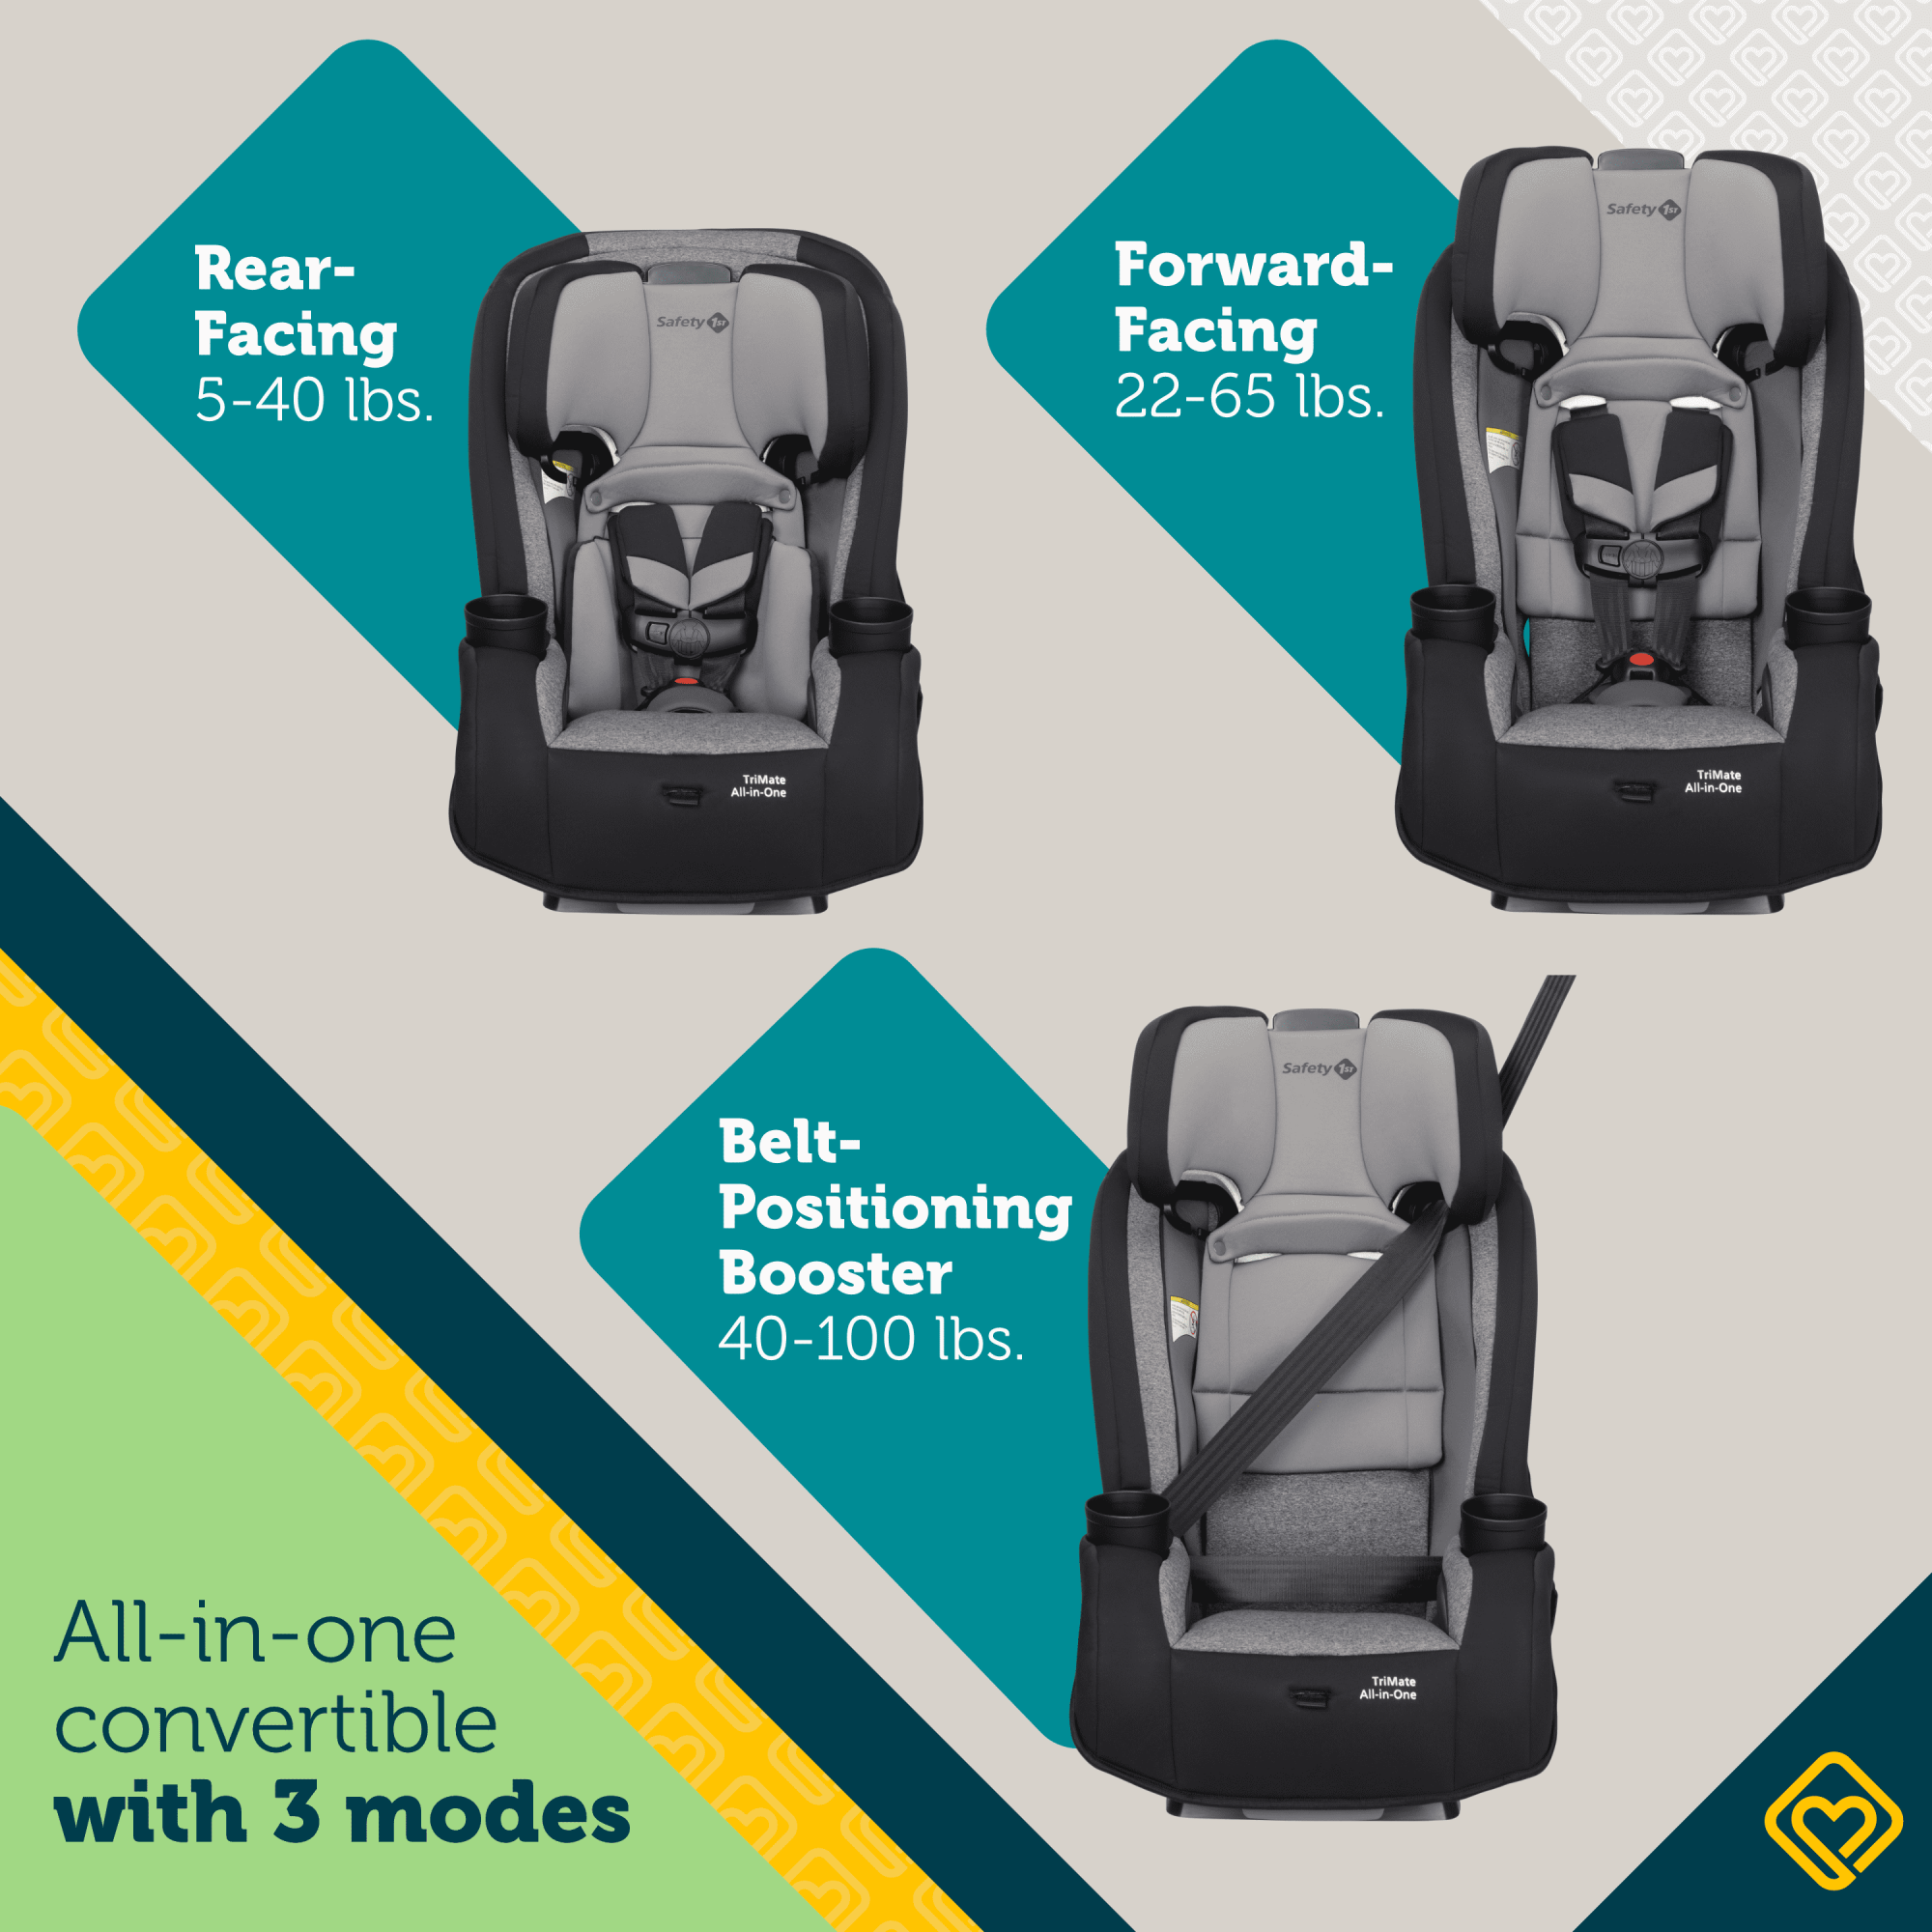 TriMate™ All-in-One Convertible Car Seat - Three modes: rear-facing 5-40 lbs., forward-facing 22-65 lbs., belt-positioning booster 40-100 lbs.